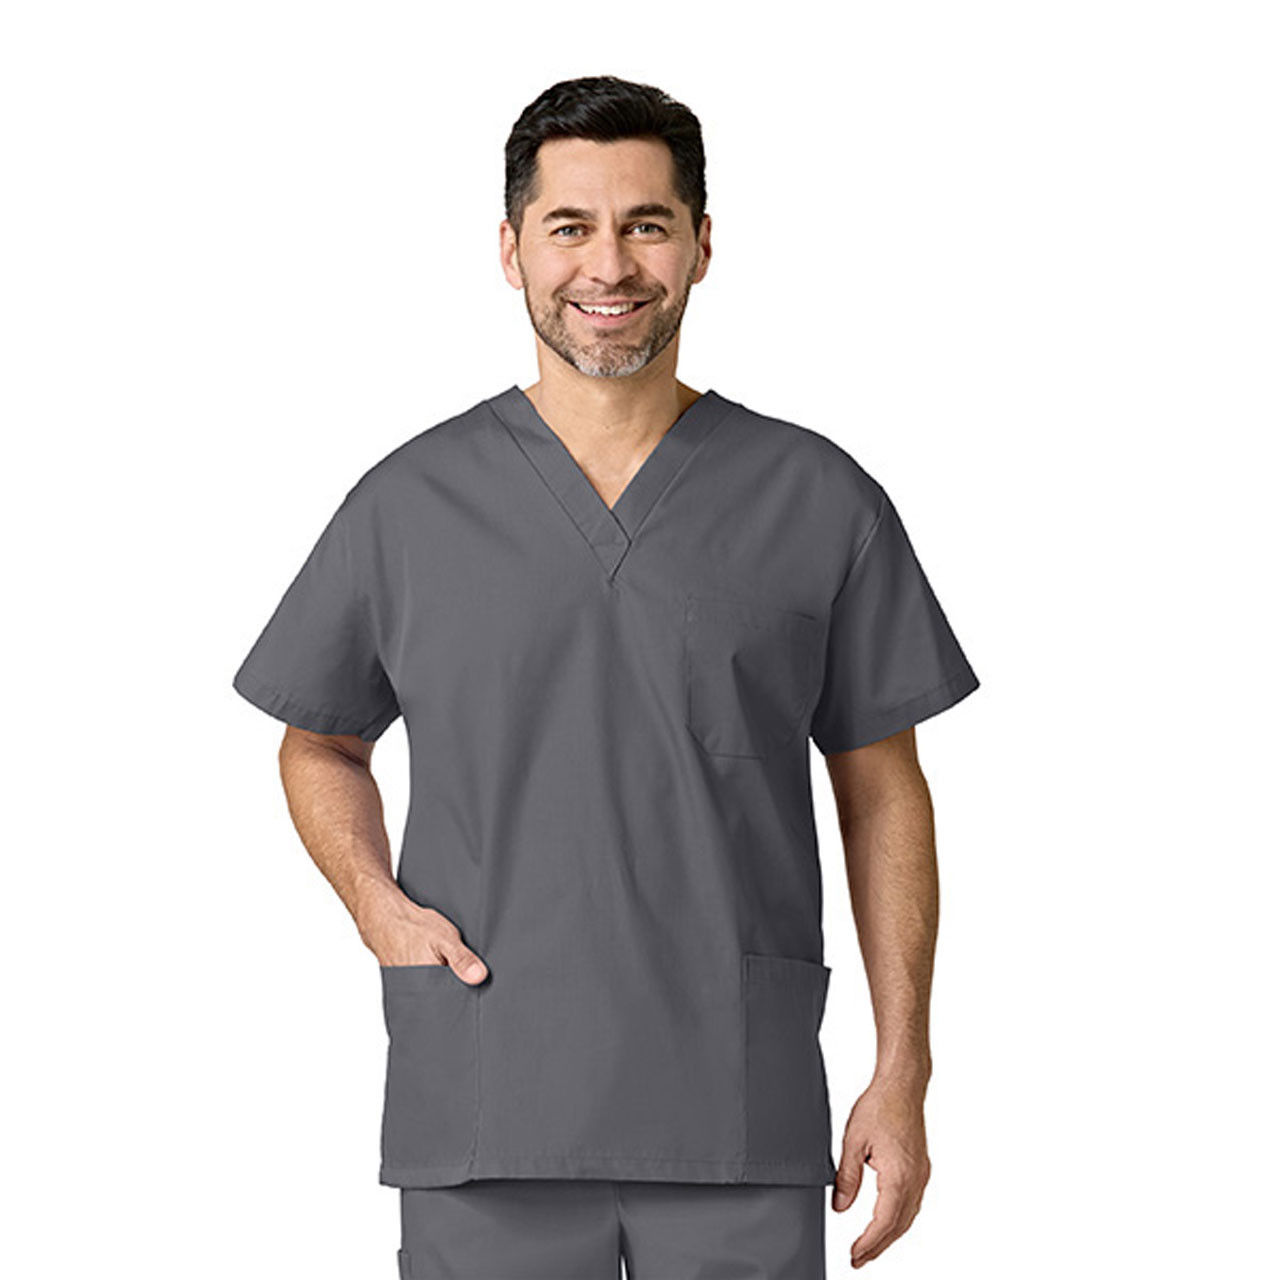 Does the Fashion Seal Scrub Top have a specific neck design?